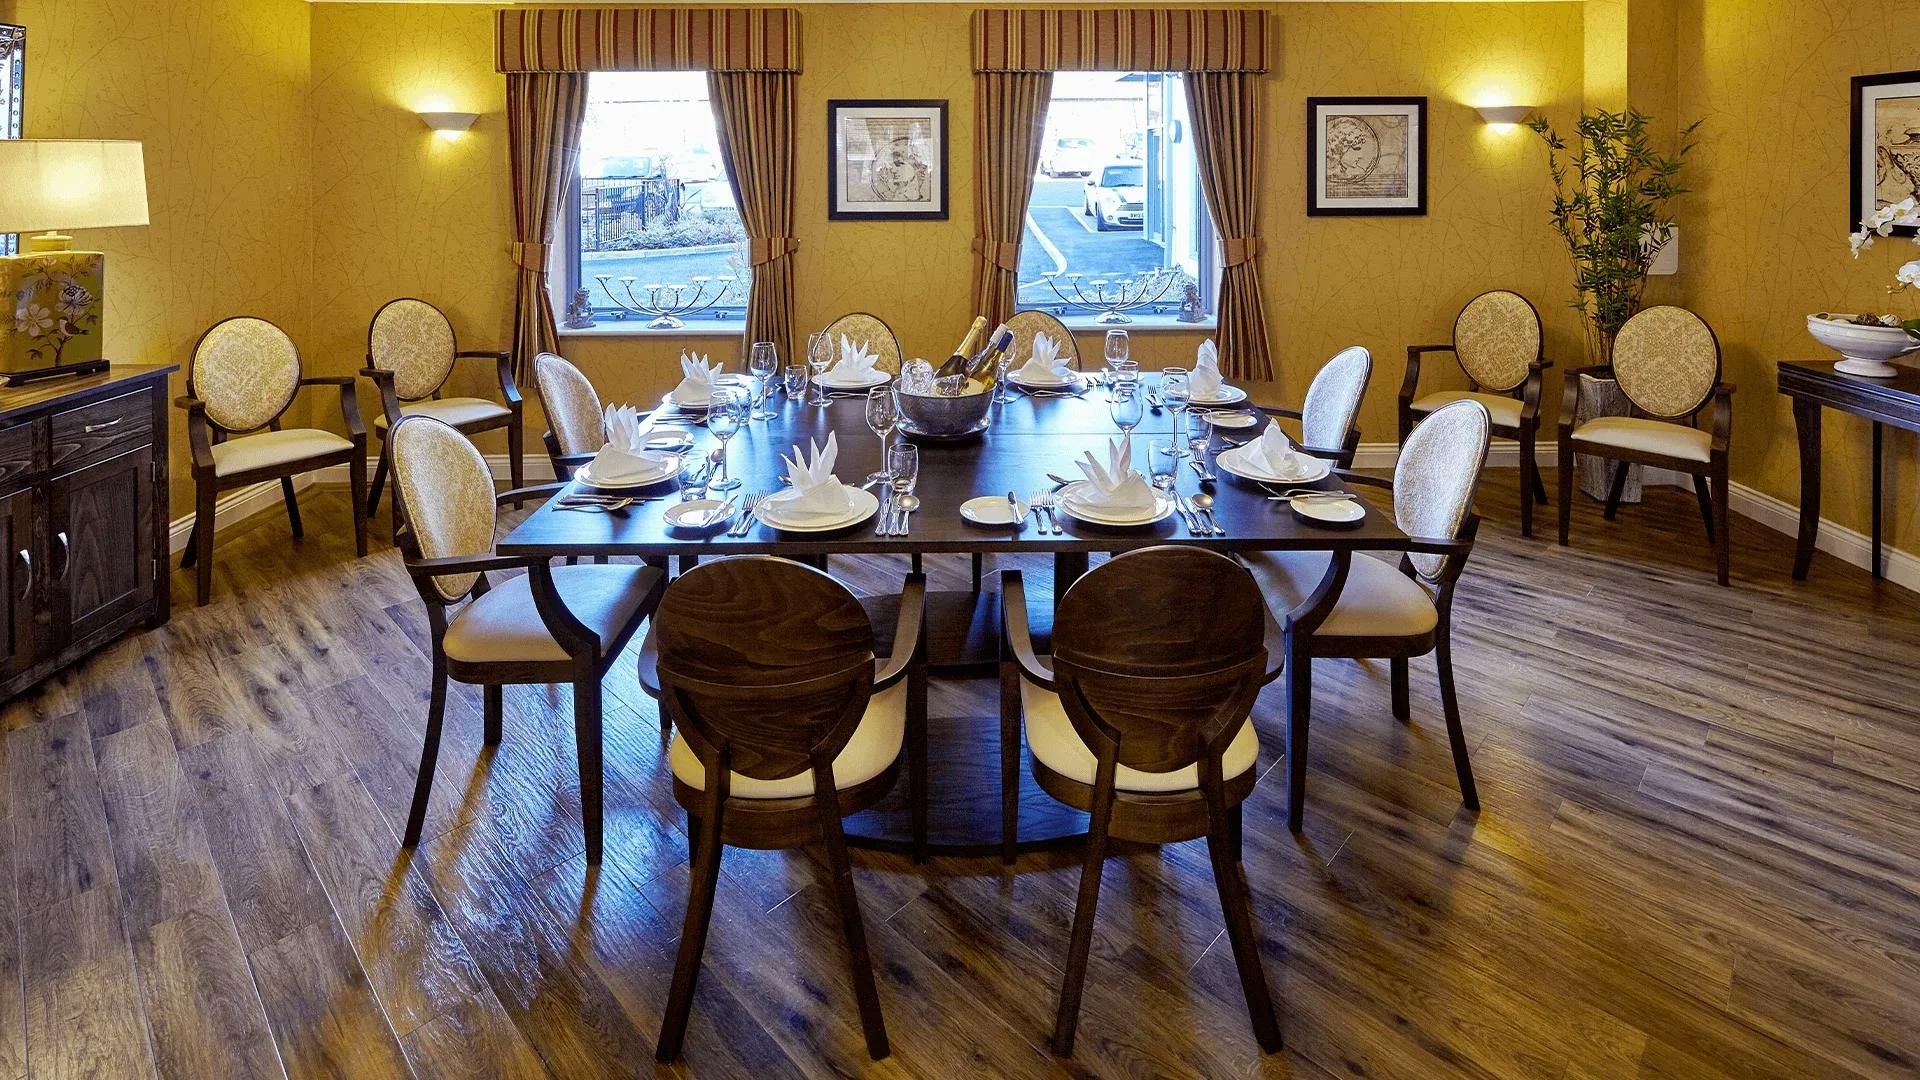 The dining area at Hawthorns Aldridge Care Home in Walsall, Staffordshire